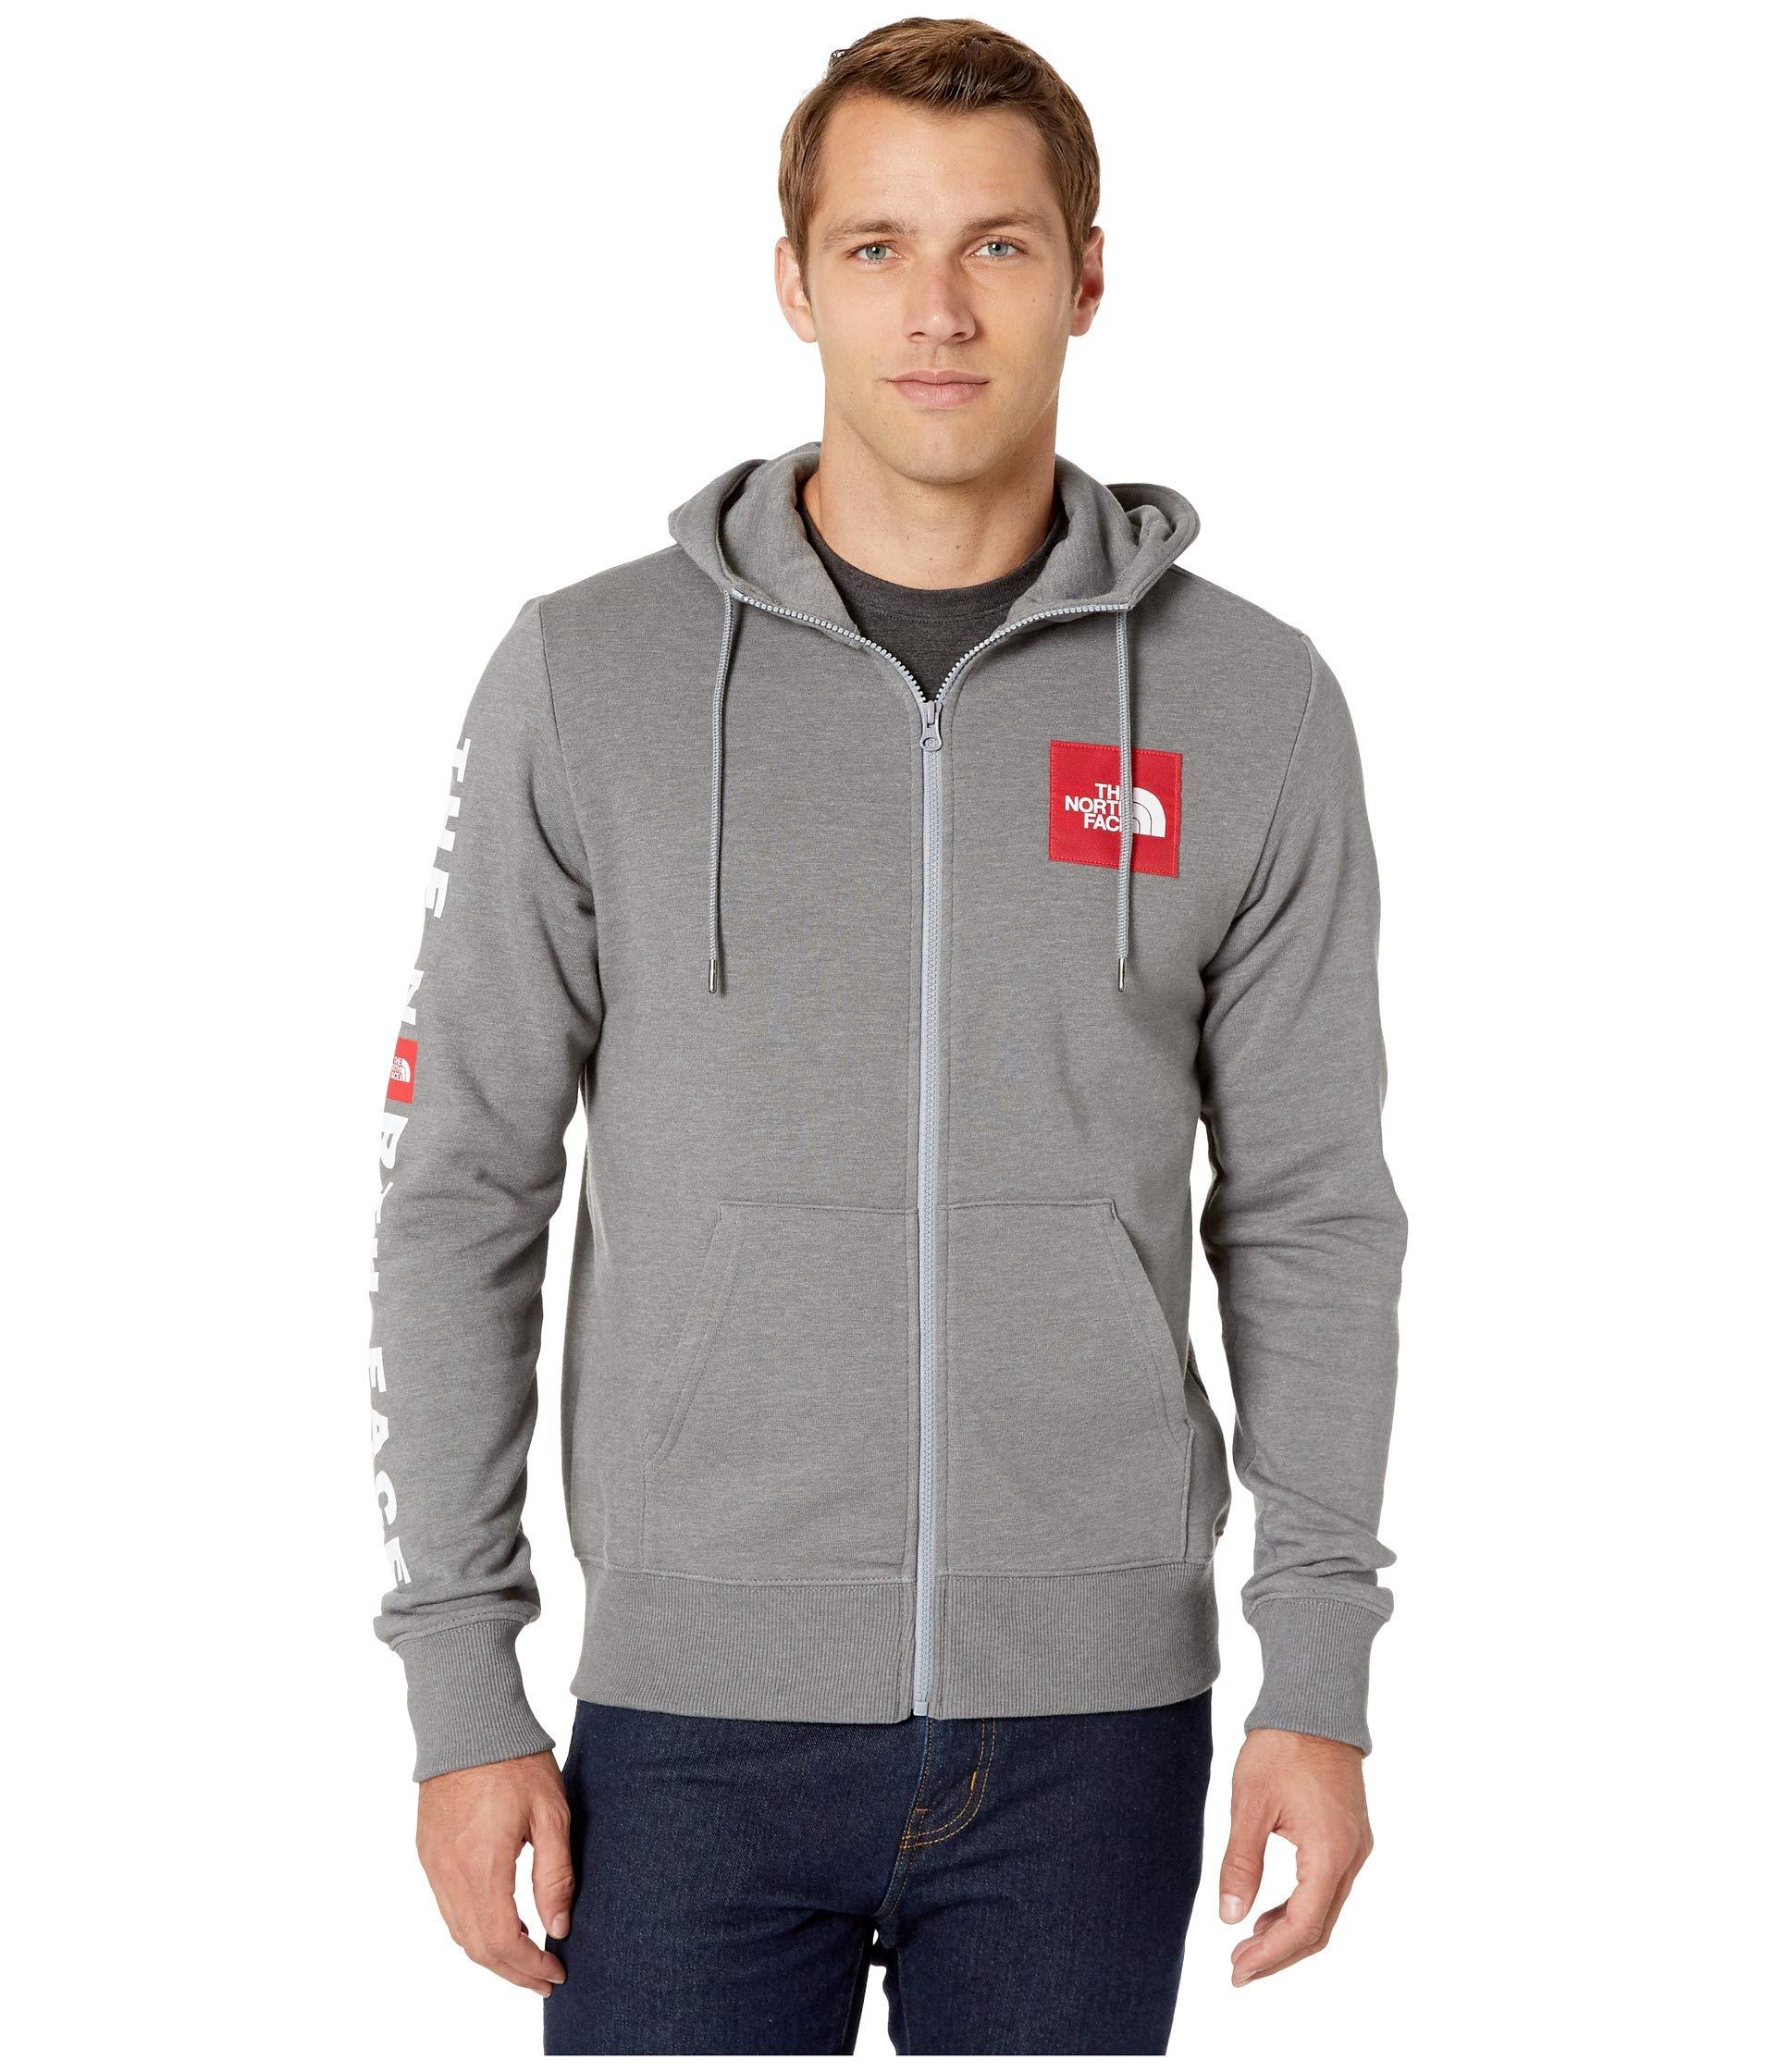 The North Face Red Box Patch Full Zip Hoodie in Gray for Men - Lyst